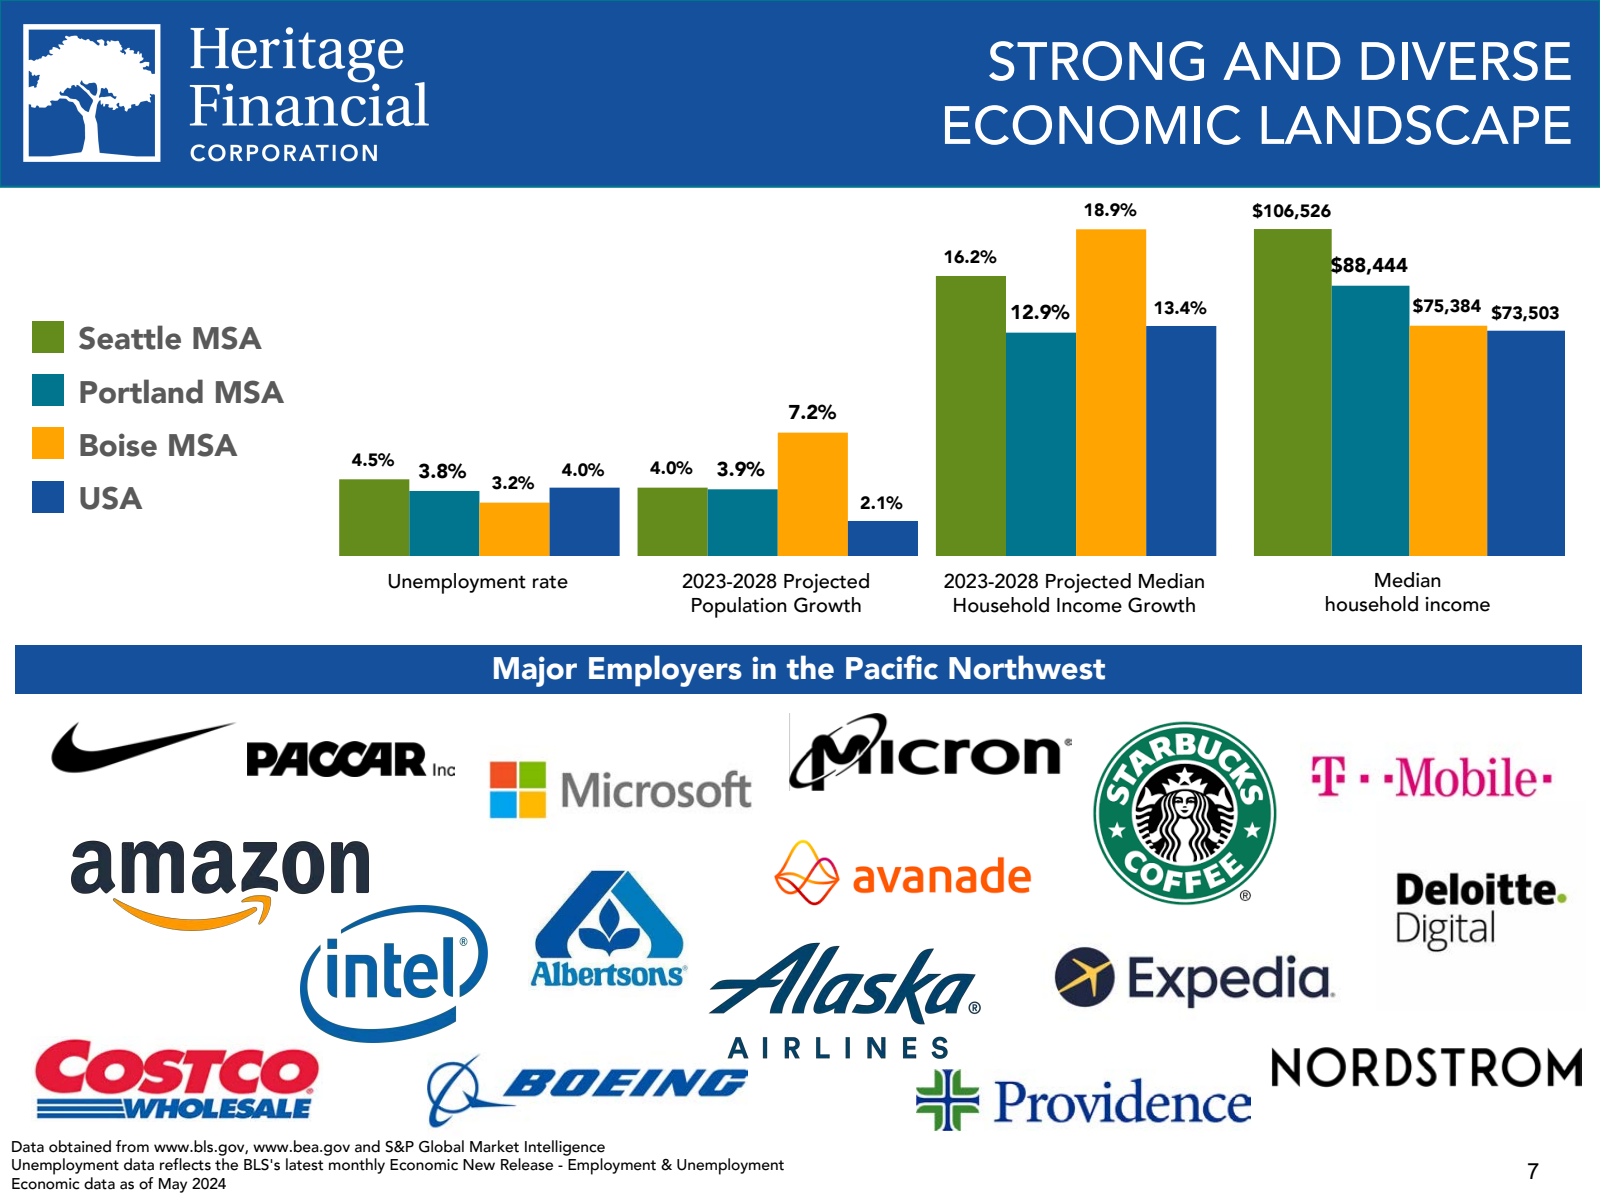 Heritage Financial 
